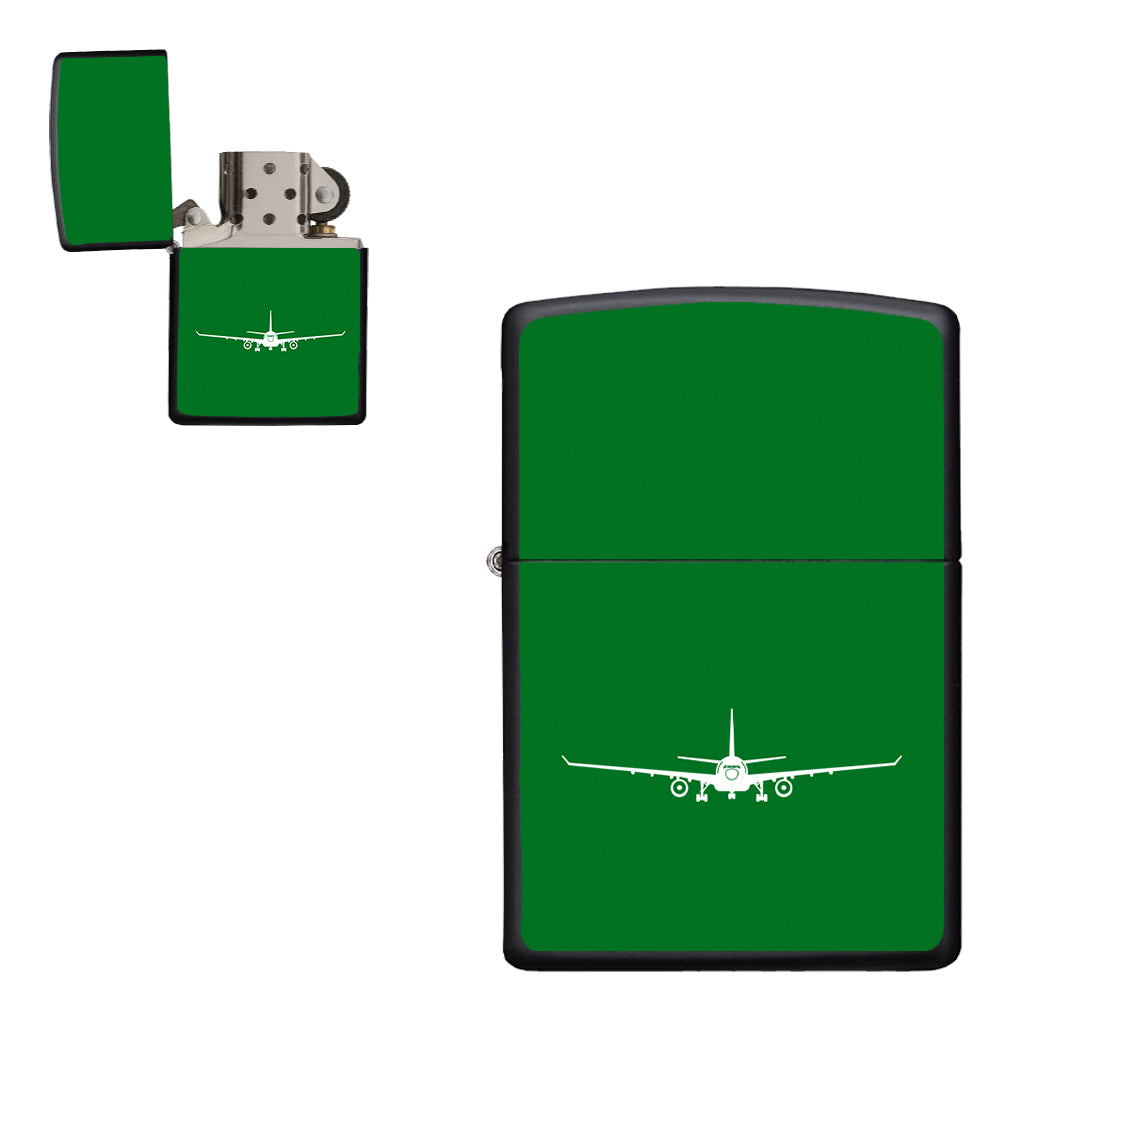 Airbus A330 Silhouette Designed Metal Lighters